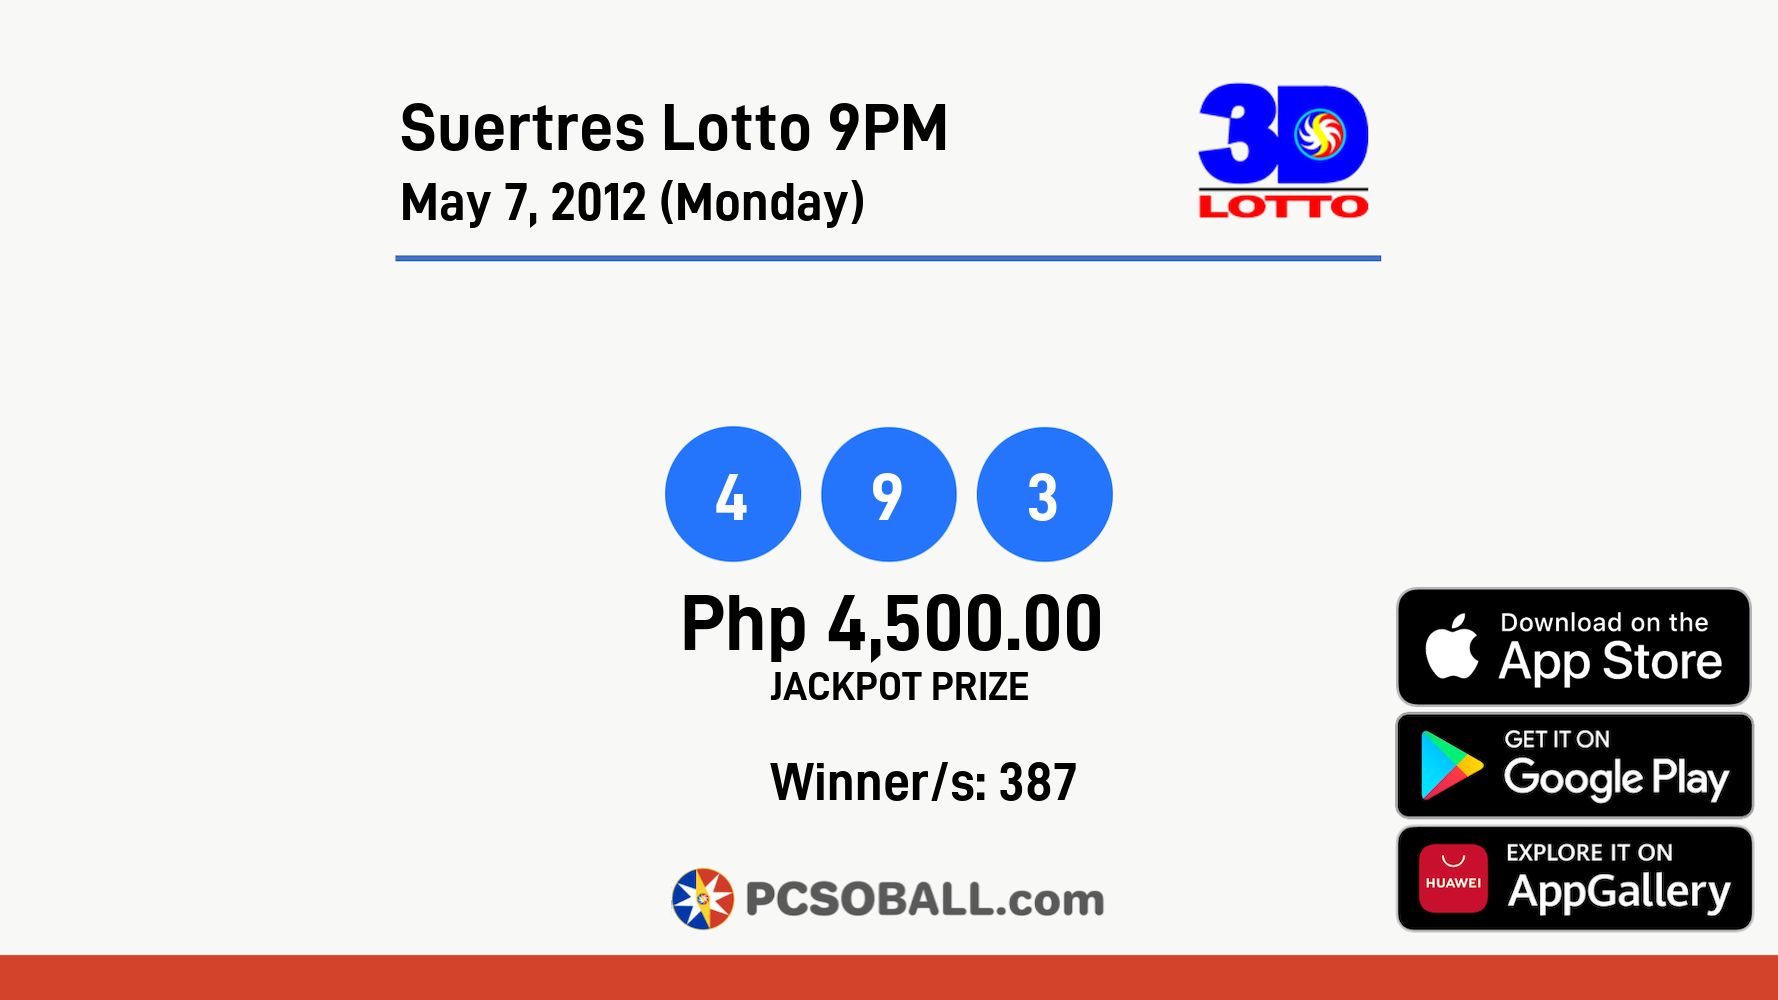 Suertres Lotto 9PM May 7, 2012 (Monday) Result